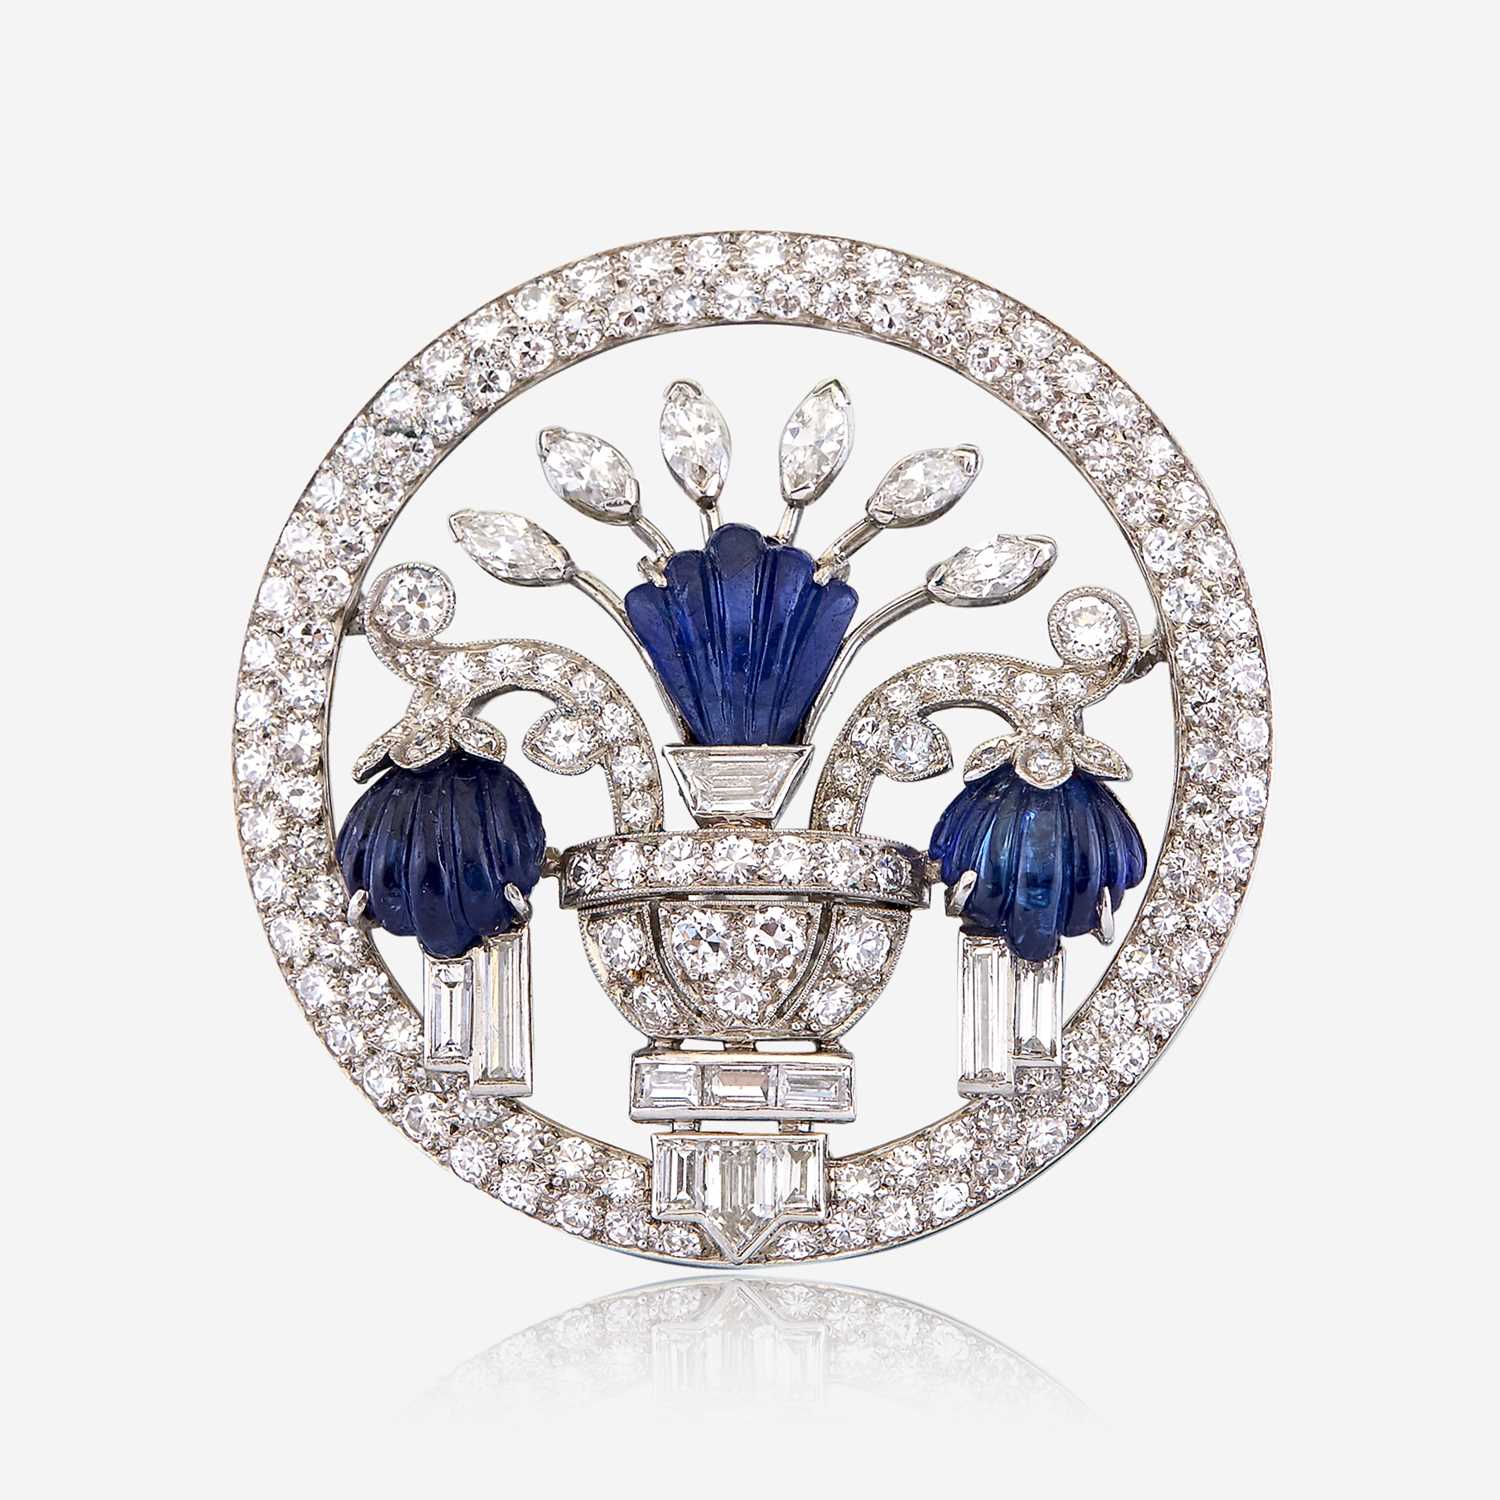 Lot 5 - A diamond, carved sapphire, and platinum brooch, J. E. Caldwell & Co.